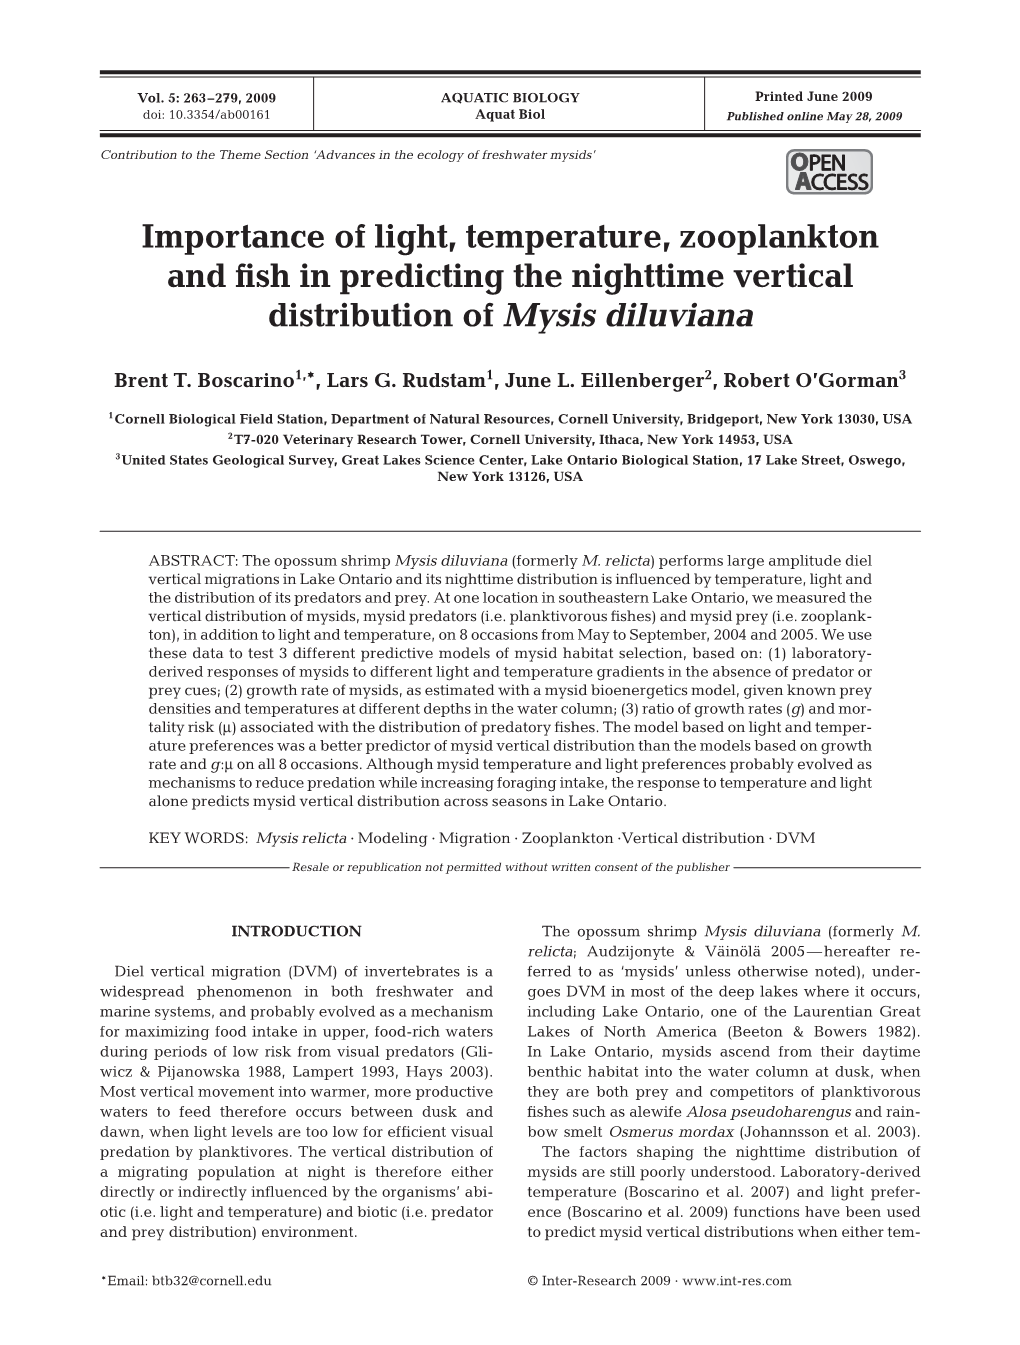 Importance of Light, Temperature, Zooplankton and Fish in Predicting